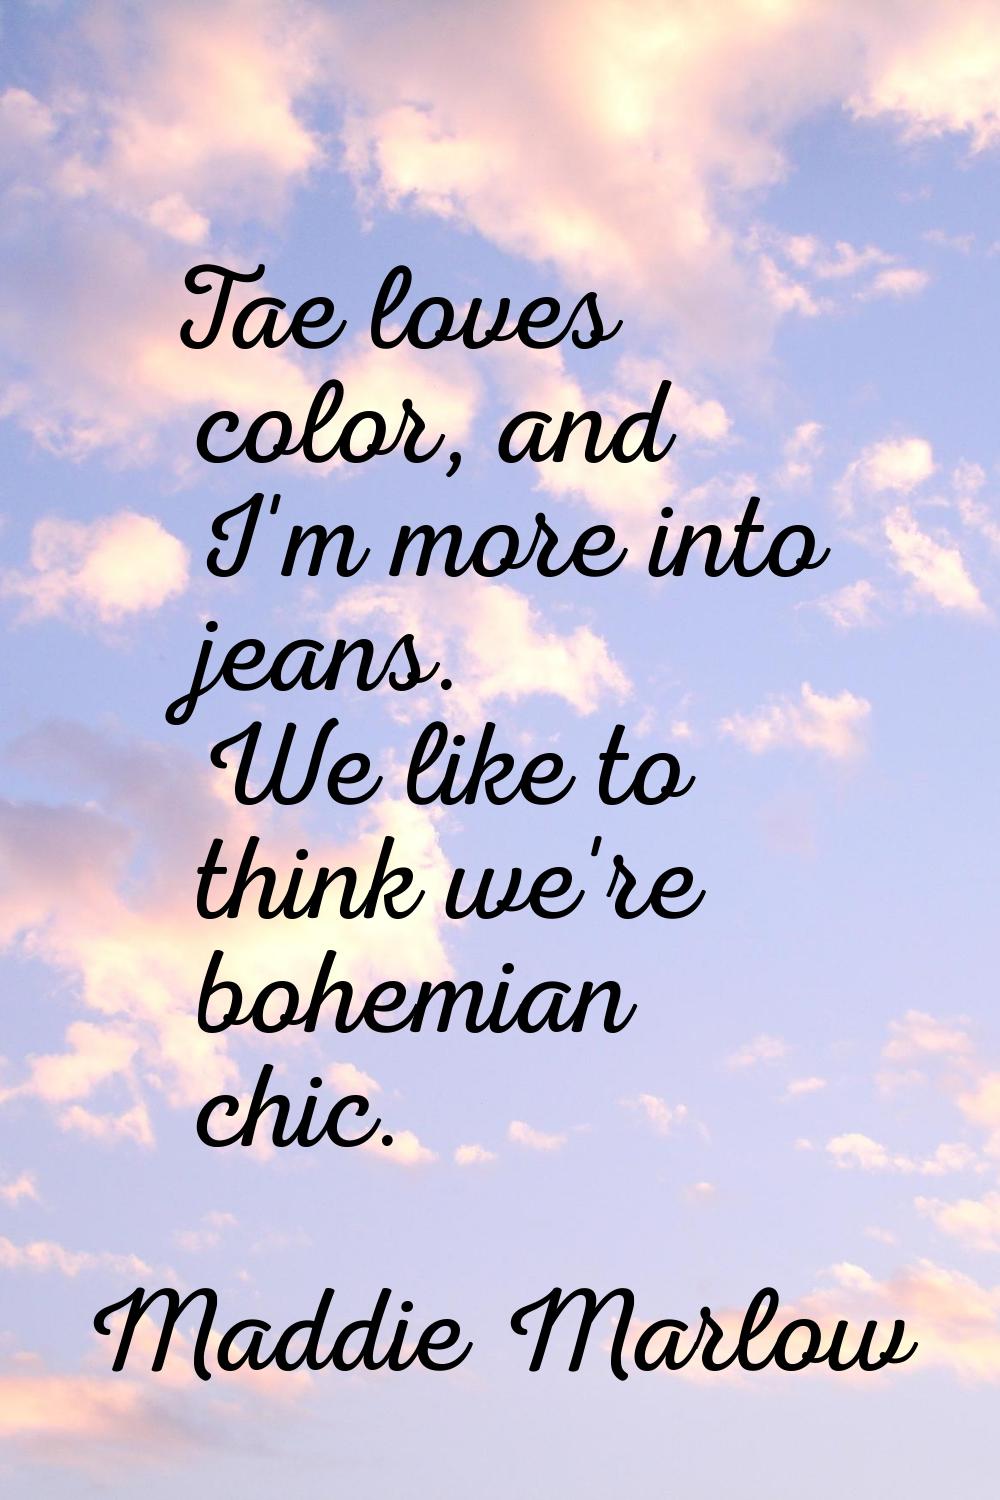 Tae loves color, and I'm more into jeans. We like to think we're bohemian chic.